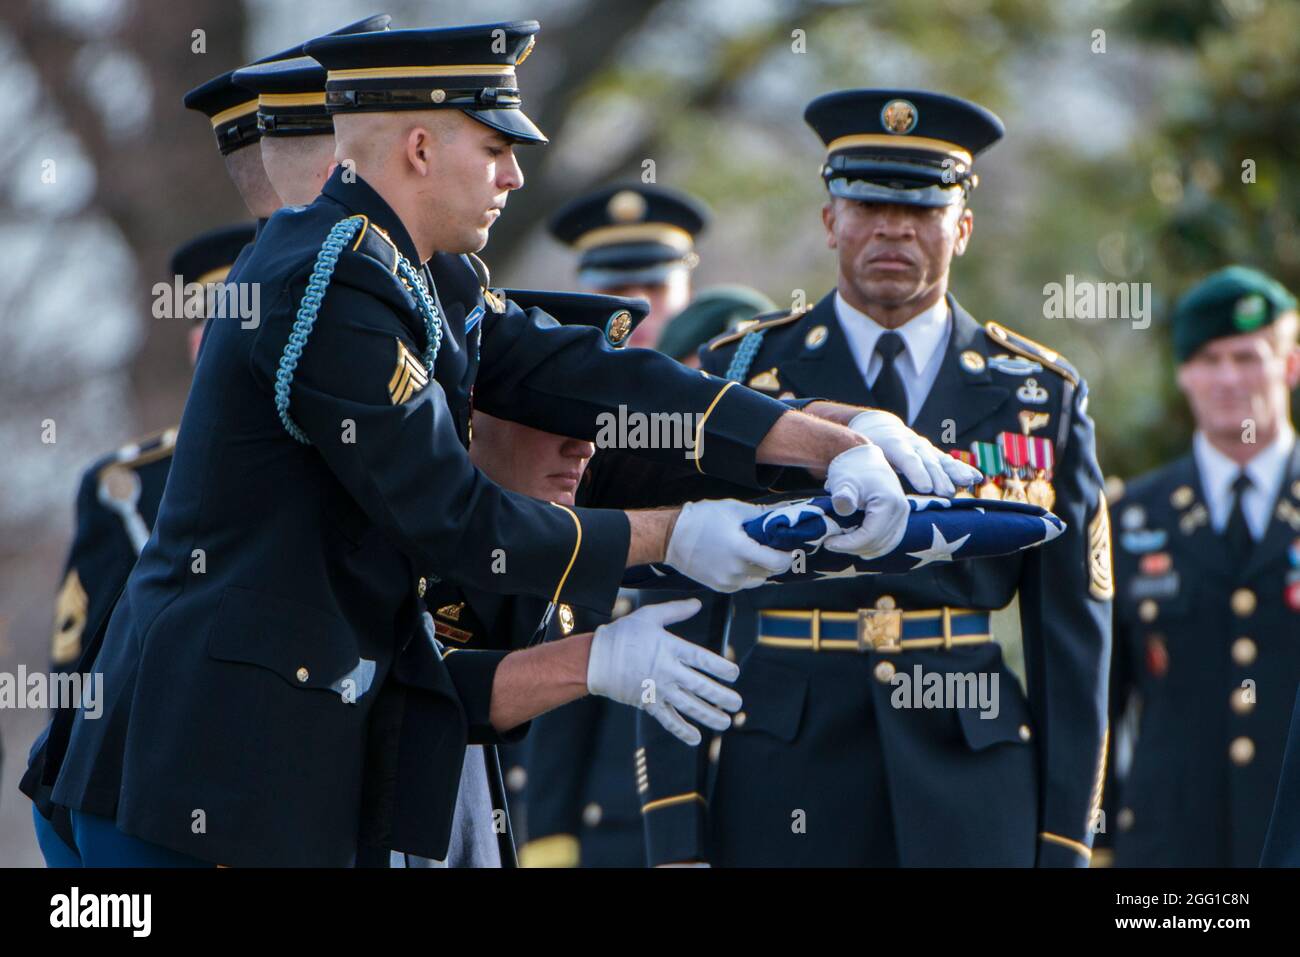 The U.S. Army Honor Guard, The 3d U.S. Infantry Regiment (The Old Guard) Caisson Platoon, and The U.S. Army Band, “Pershing’s Own”, conduct the funeral of U.S. Army Sgt. 1st Class Mihail Golin in Section 60 of Arlington National Cemetery, Arlington, Virginia, Jan. 22, 2018. Golin, an 18B Special Forces Weapons Sergeant assigned to 10th Special Forces Group (Airborne) died Jan. 1, 2018, as a result of wounds sustained while engaged in combat operations in Nangarhar Province, Afghanistan.  Golin deployed to Afghanistan in September 2017 with the 2nd Battalion, 10th Special Forces Group, in suppo Stock Photo